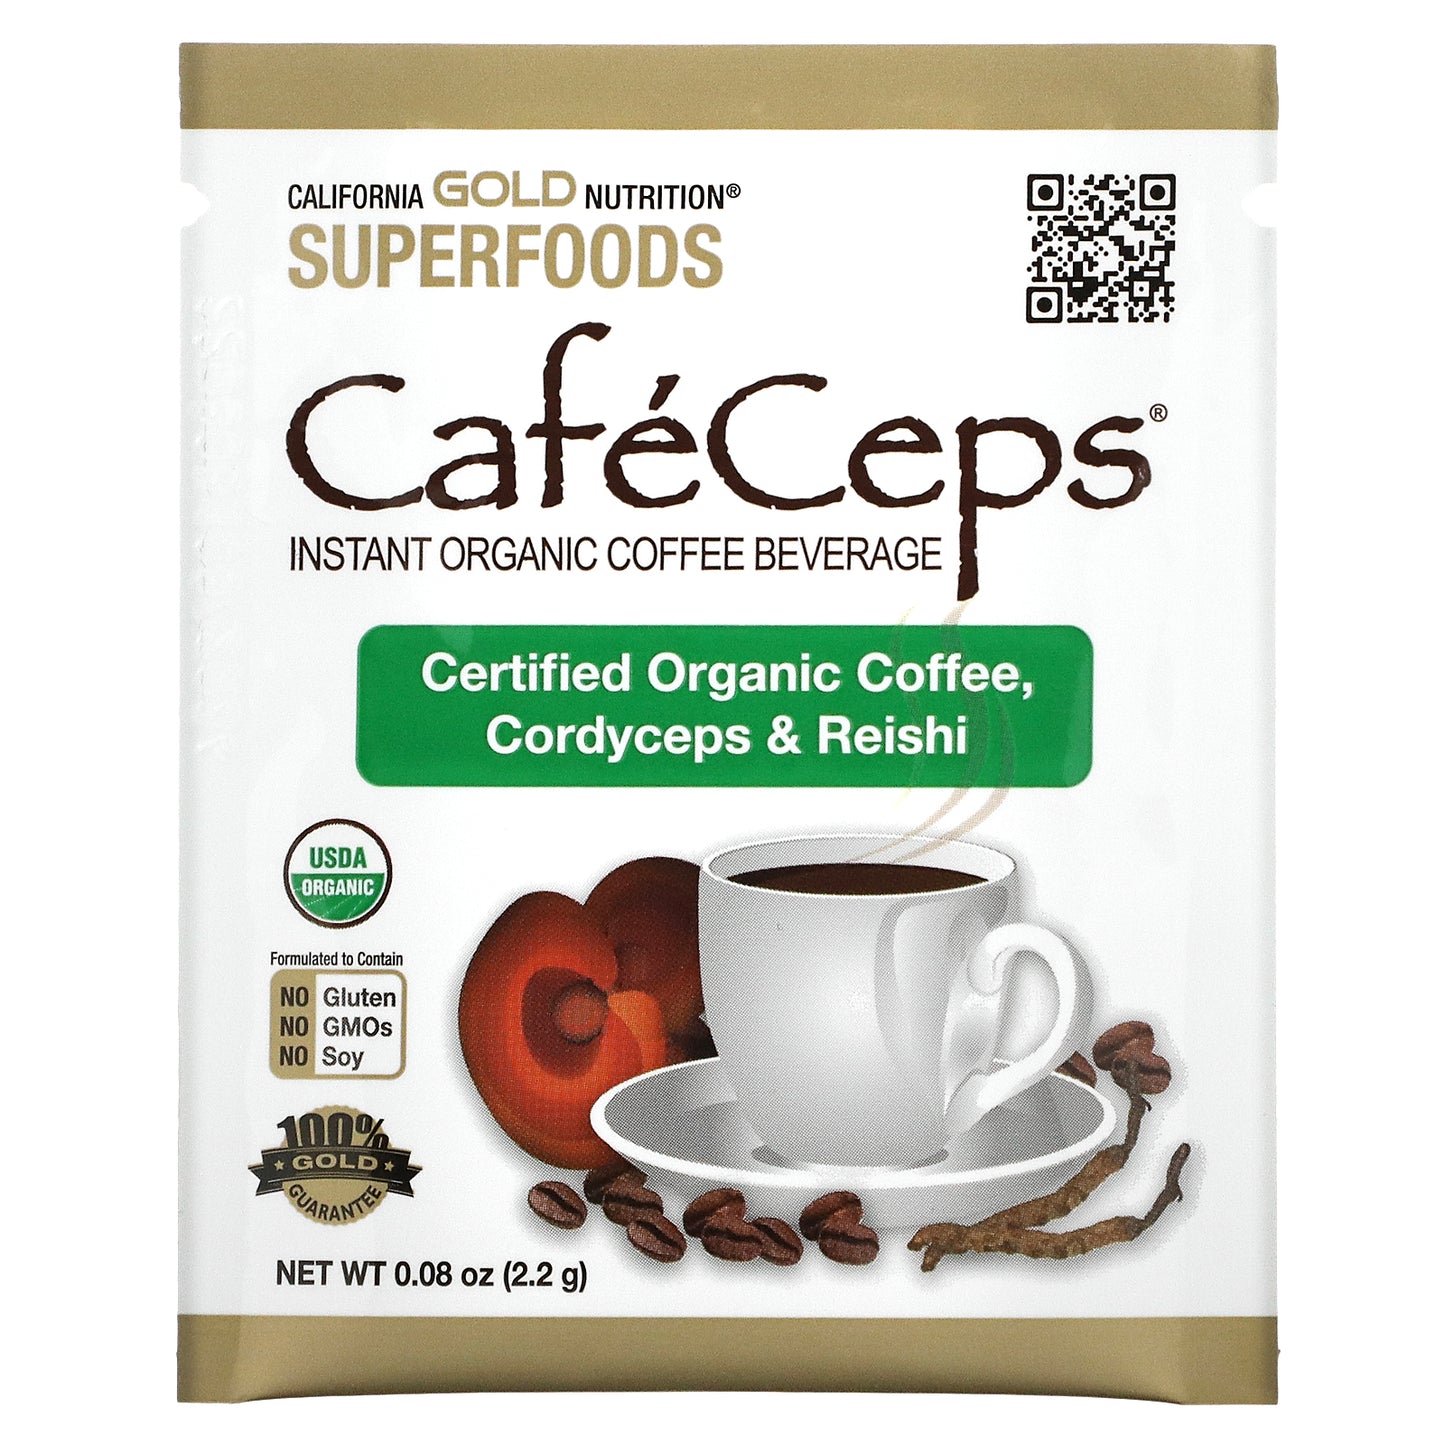 California Gold Nutrition, CafeCeps, Certified Organic Instant Coffee with Cordyceps and Reishi Mushroom Powder, 30 Packets, 0.08 oz (2.2 g) Each